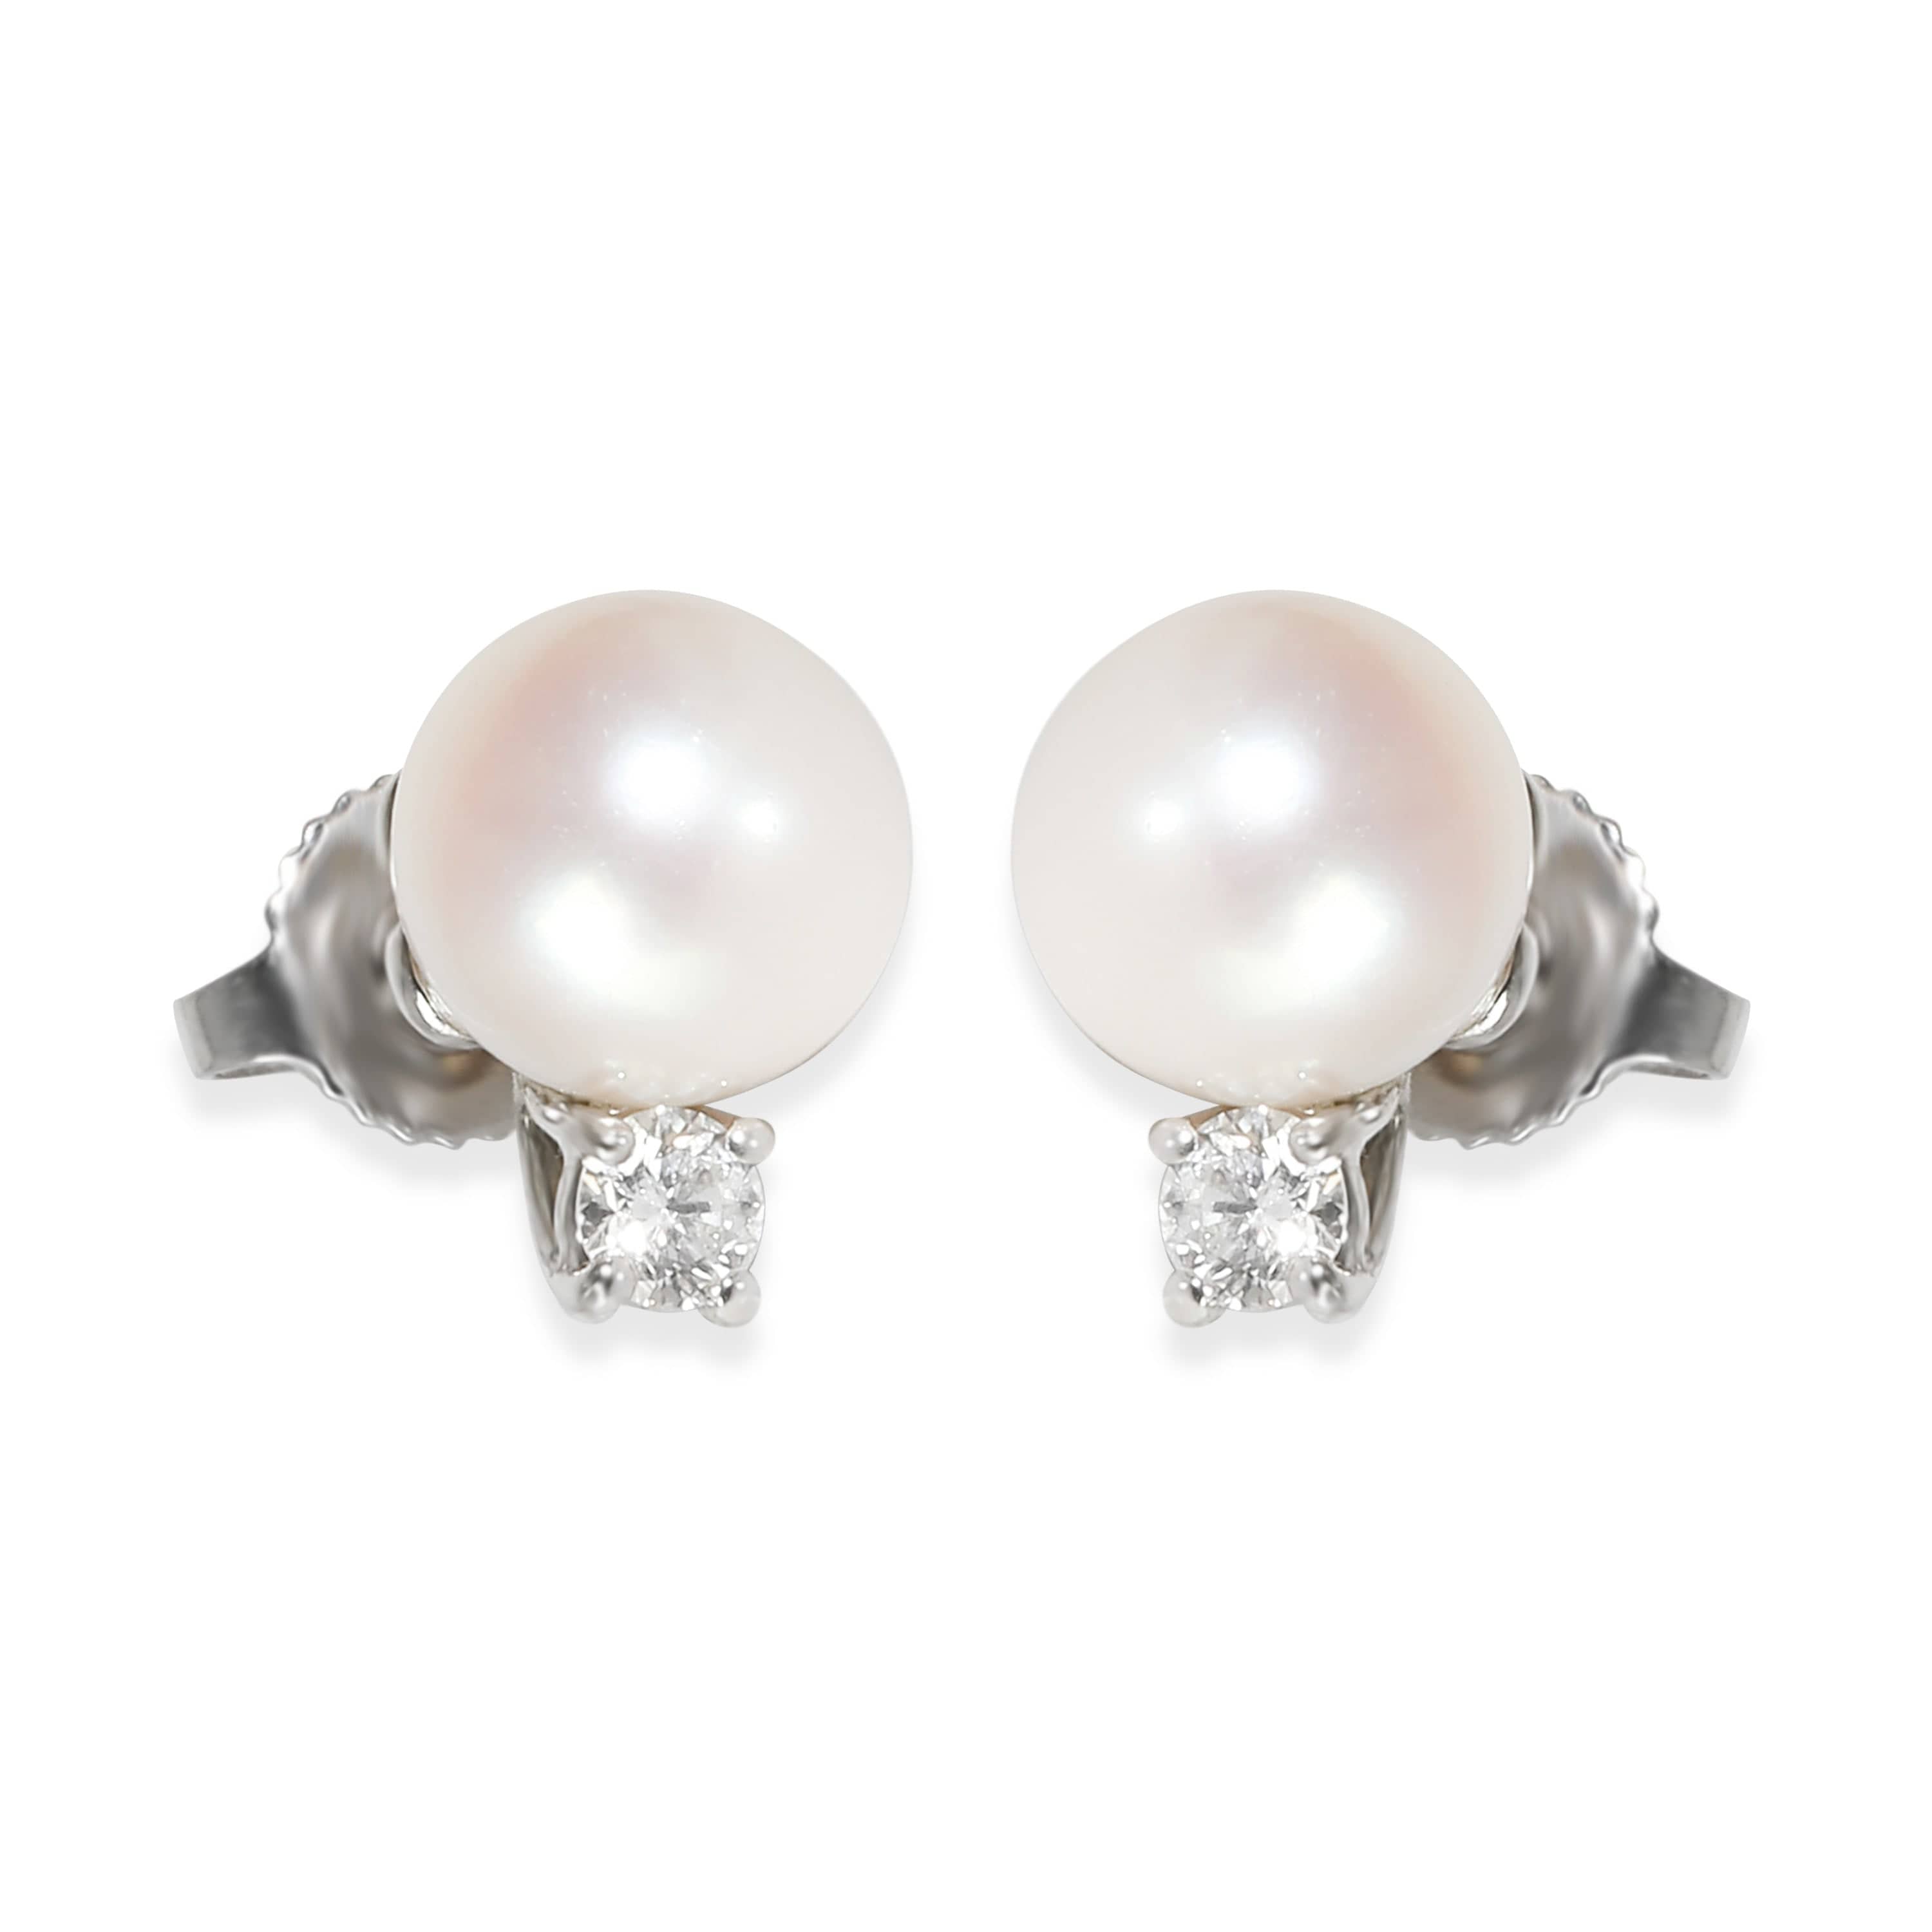 Tiffany & Co. Signature Pearls Stud Earrings in 18k White Gold